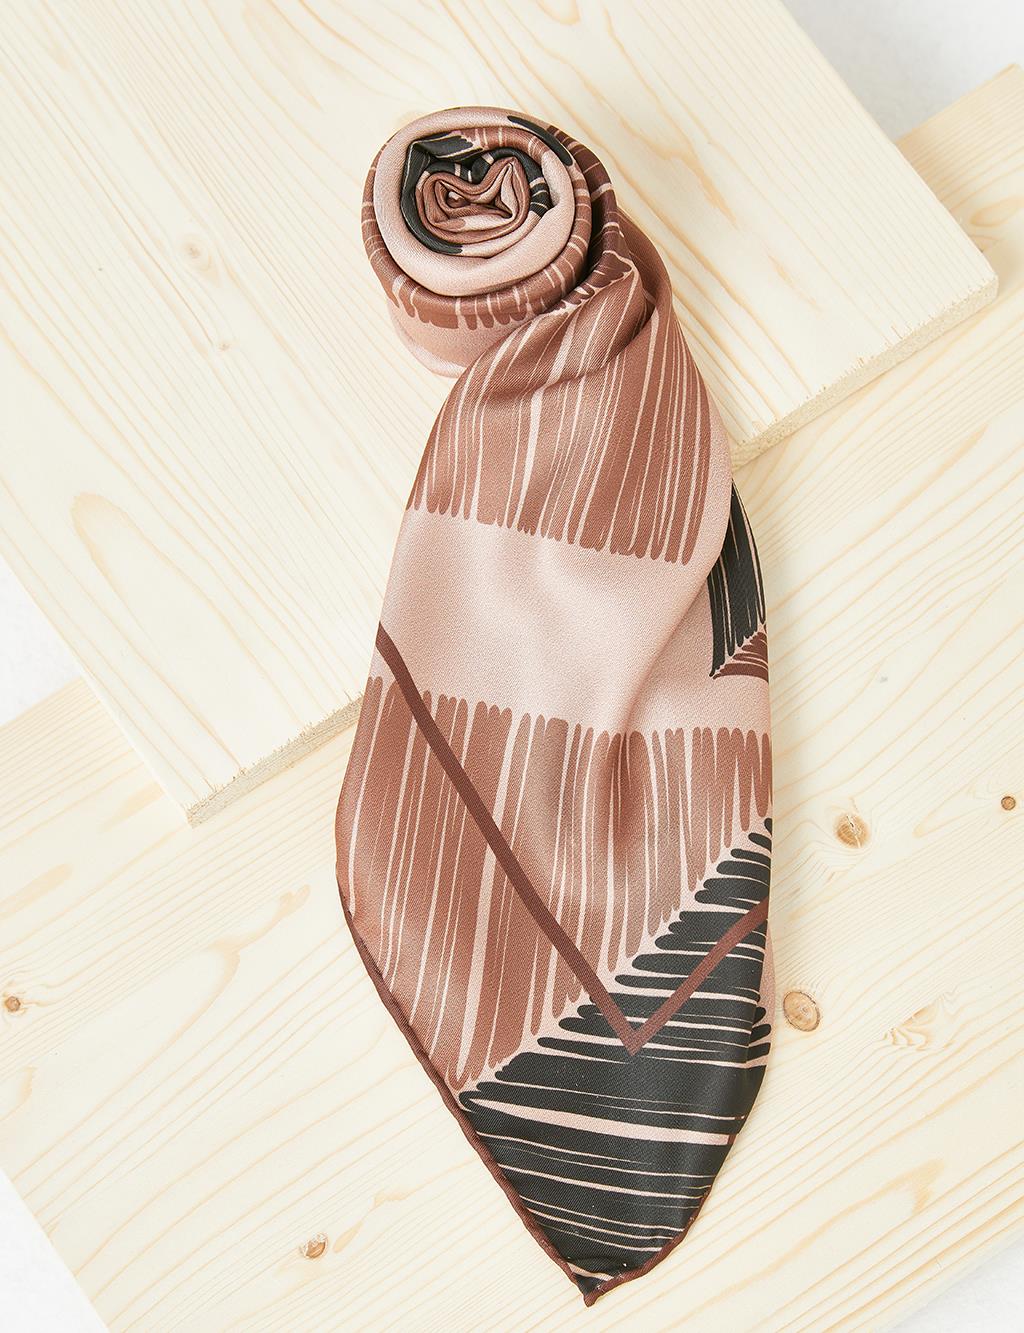 Abstract Patterned PES Scarf B21 ESP87 Camel